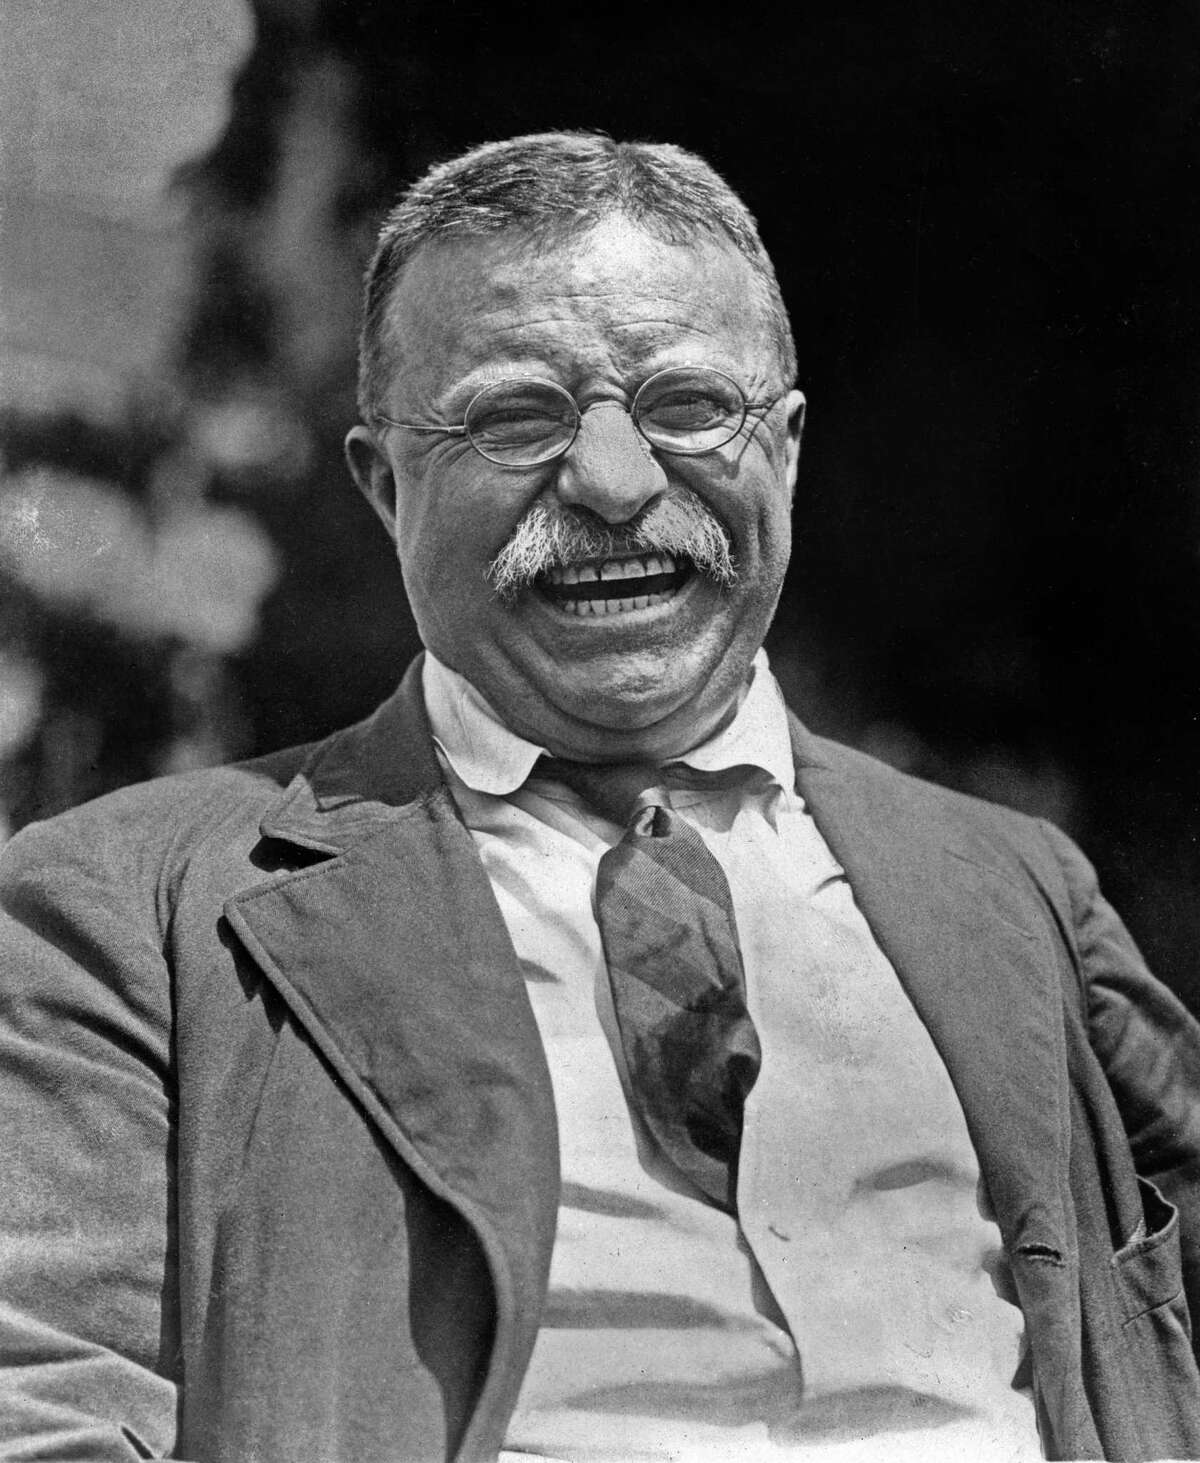 This photo provided by Brown Brothers shows Teddy Roosevelt at his Oyster Bay, N.Y., home in 1912. A Pennsylvania-based stock photography company founded in Manhattan 110 years ago is looking to sell its collection of more than 1 million photographs and negatives, including tens of thousands of black-and-white images of New York City before World War II. (AP Photo/Brown Brothers)